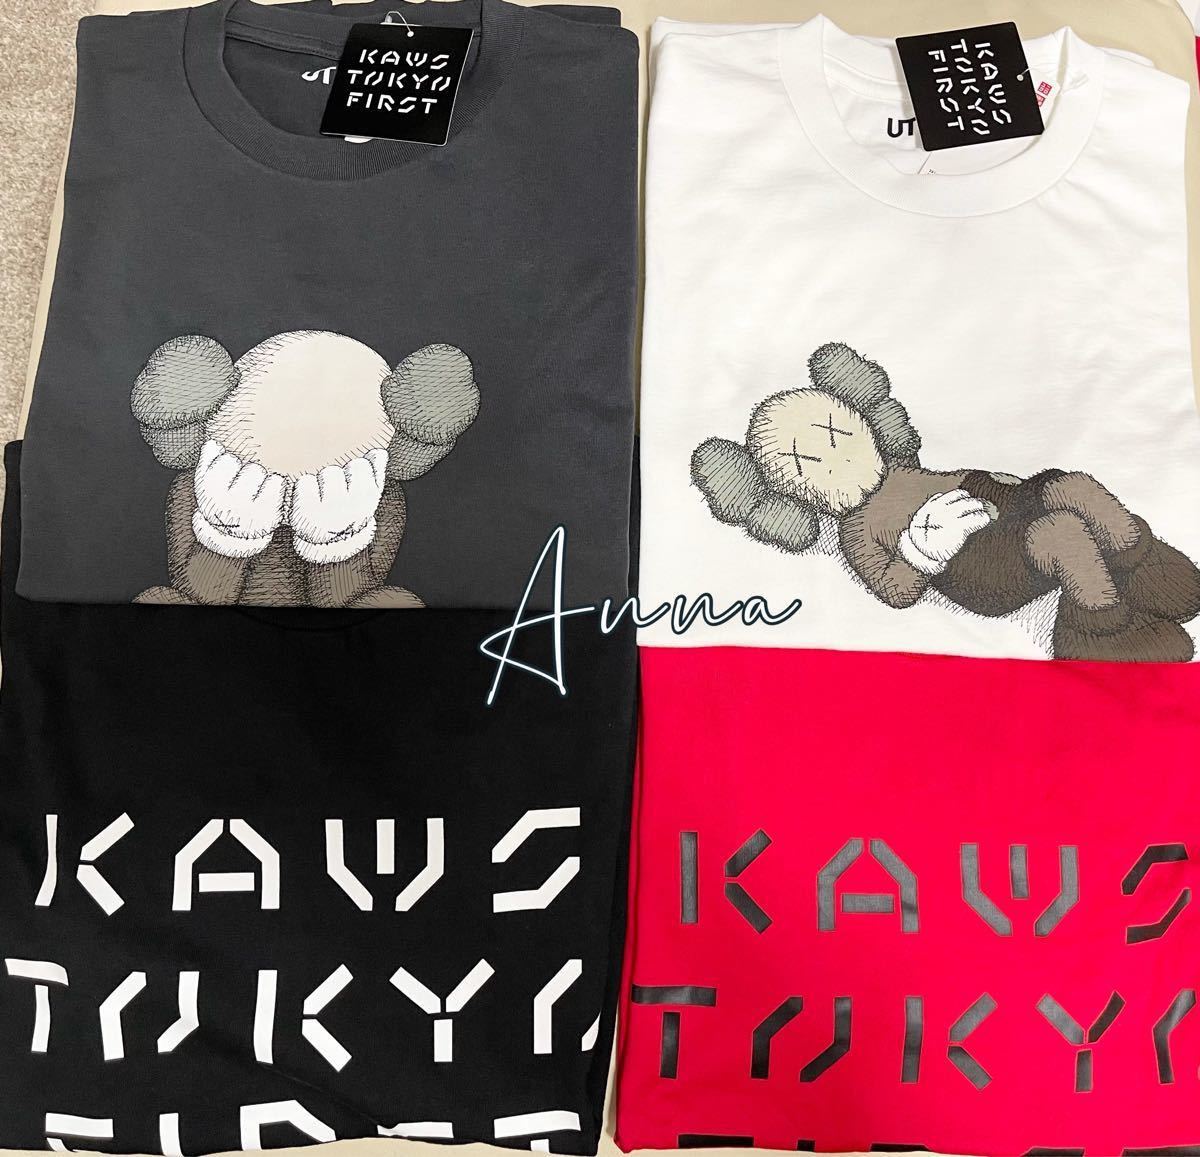 KAWS TOKYO FIRST Tシャツ4点セット 新品未使用 ラスト1セット 